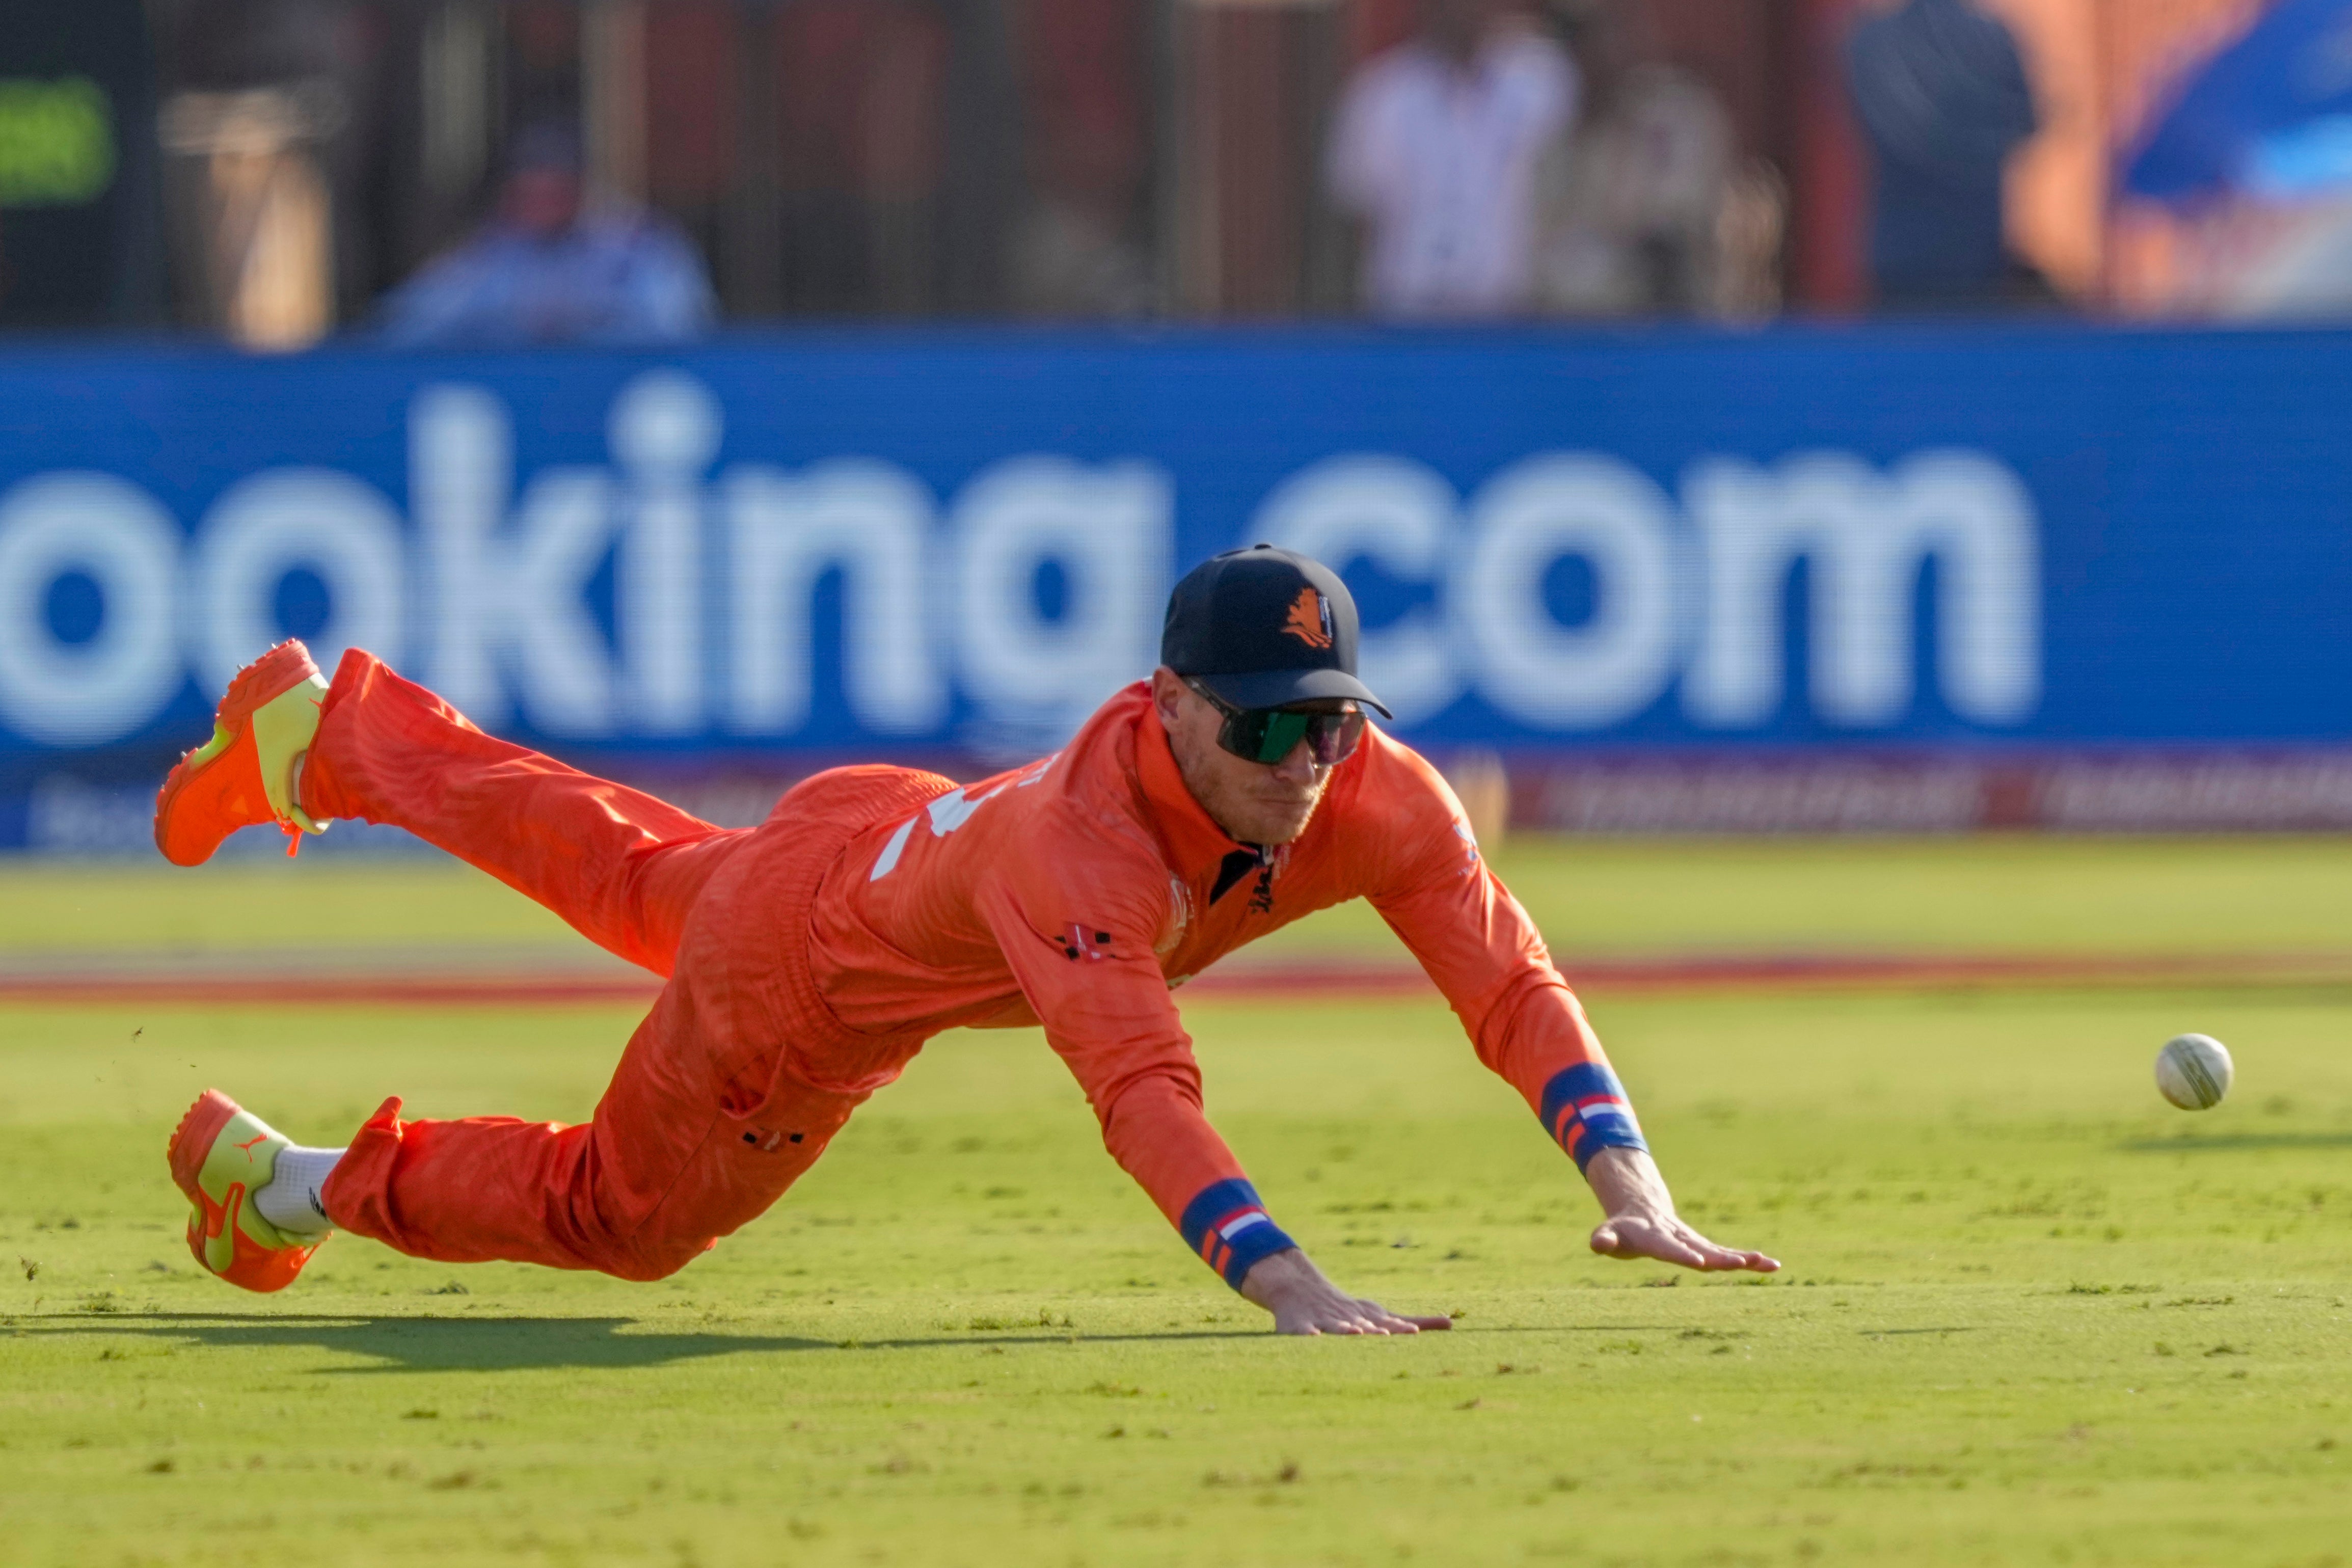 Netherlands’ Sybrand Engelbrecht dives to field a ball during the ICC Men’s Cricket World Cup match between Pakistan and Netherlands in Hyderabad